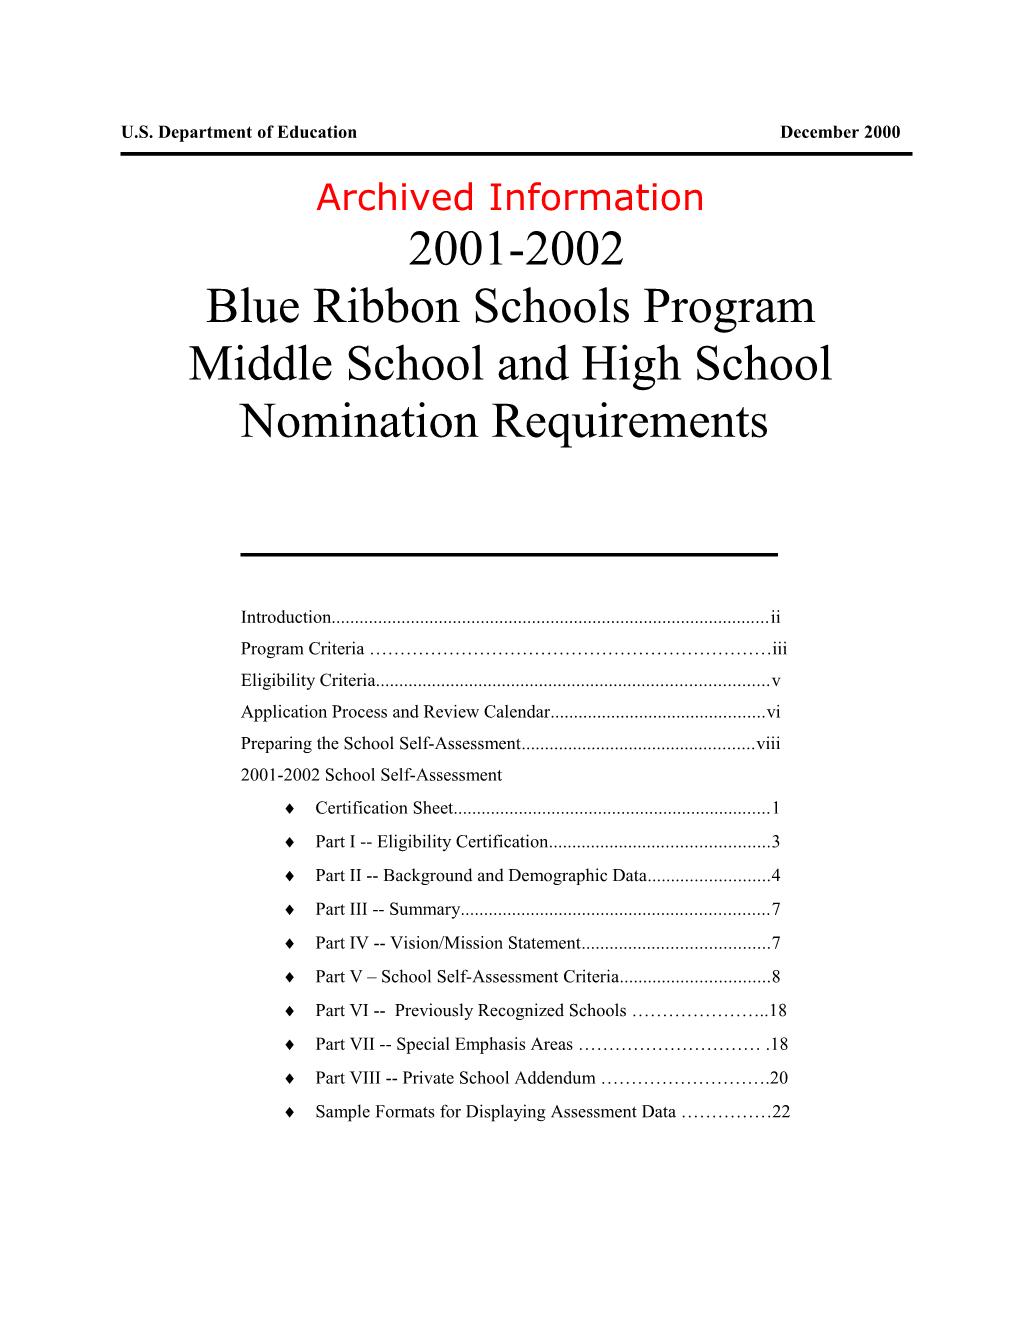 Archived: Blue Ribbon Schools Program Middle School and High School Nomination Requirements